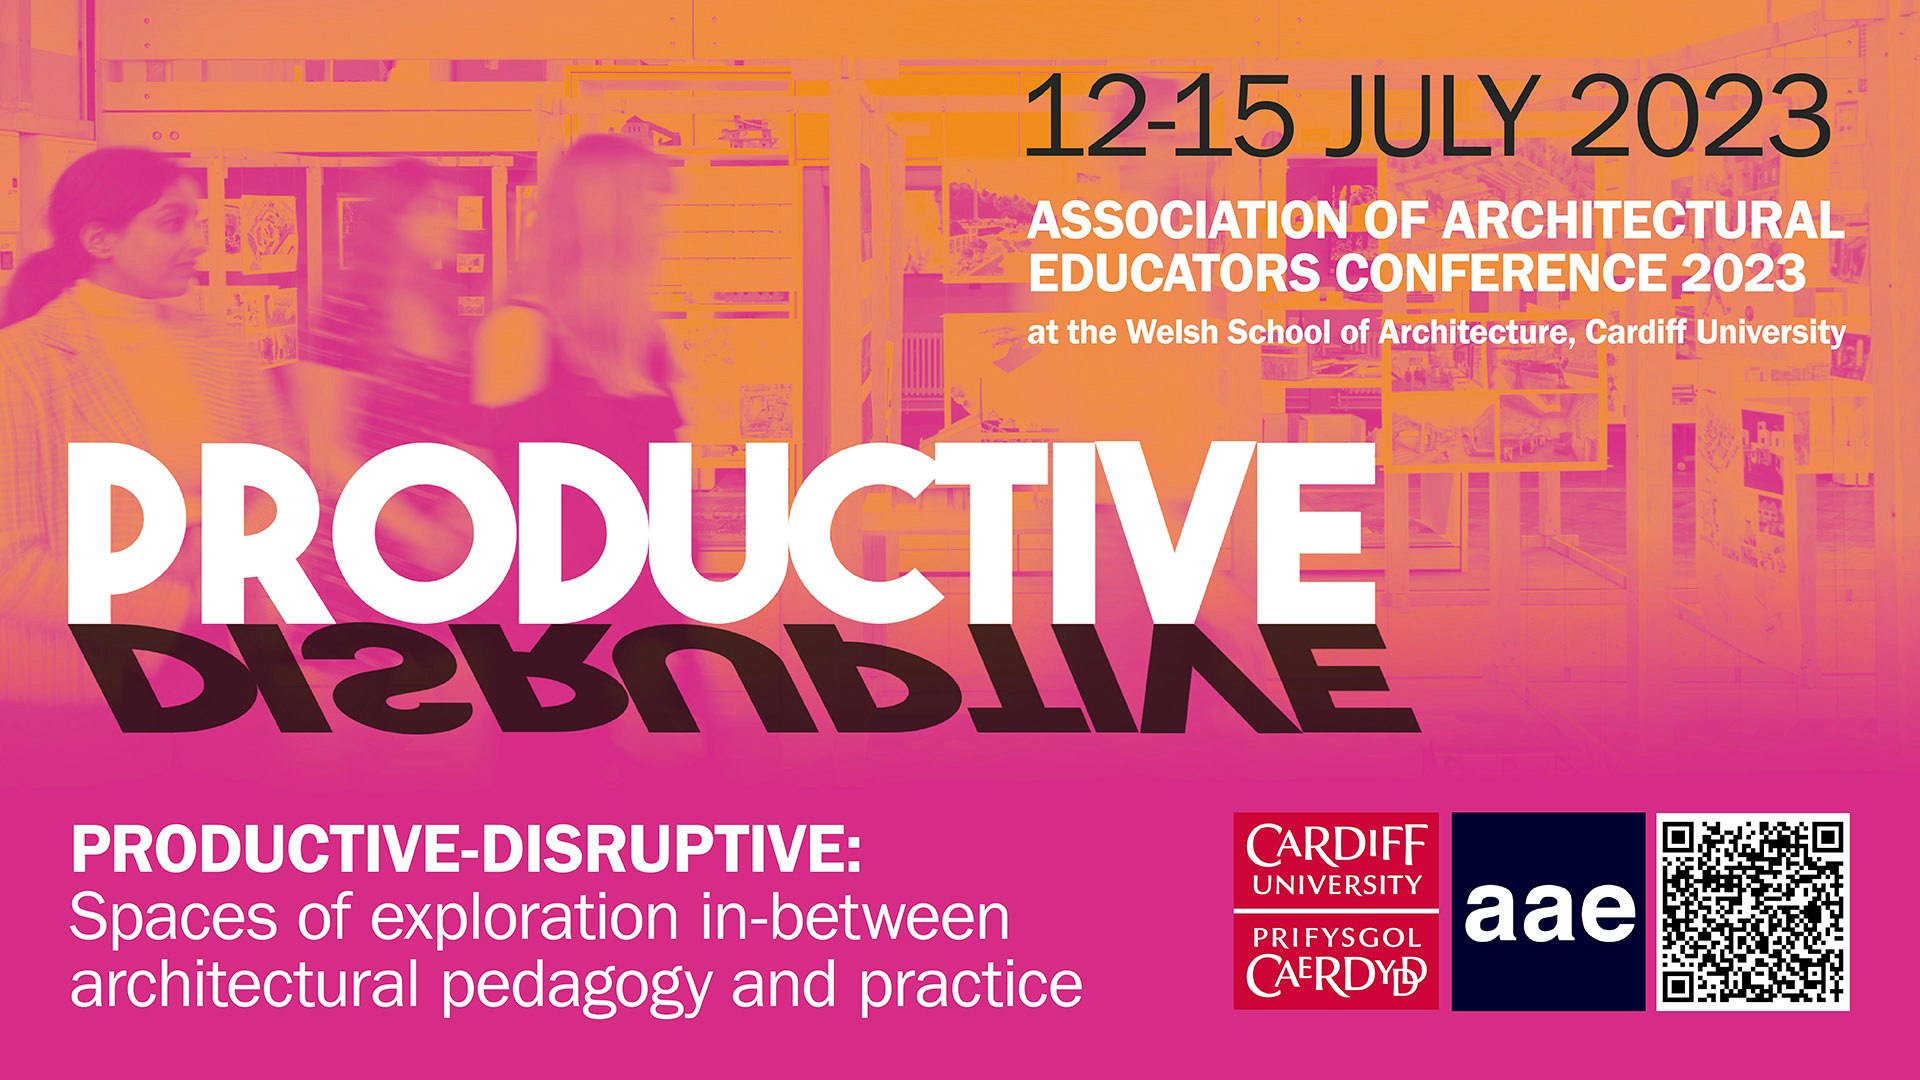 Association of Architectural Educators Conference 2023 Welsh School